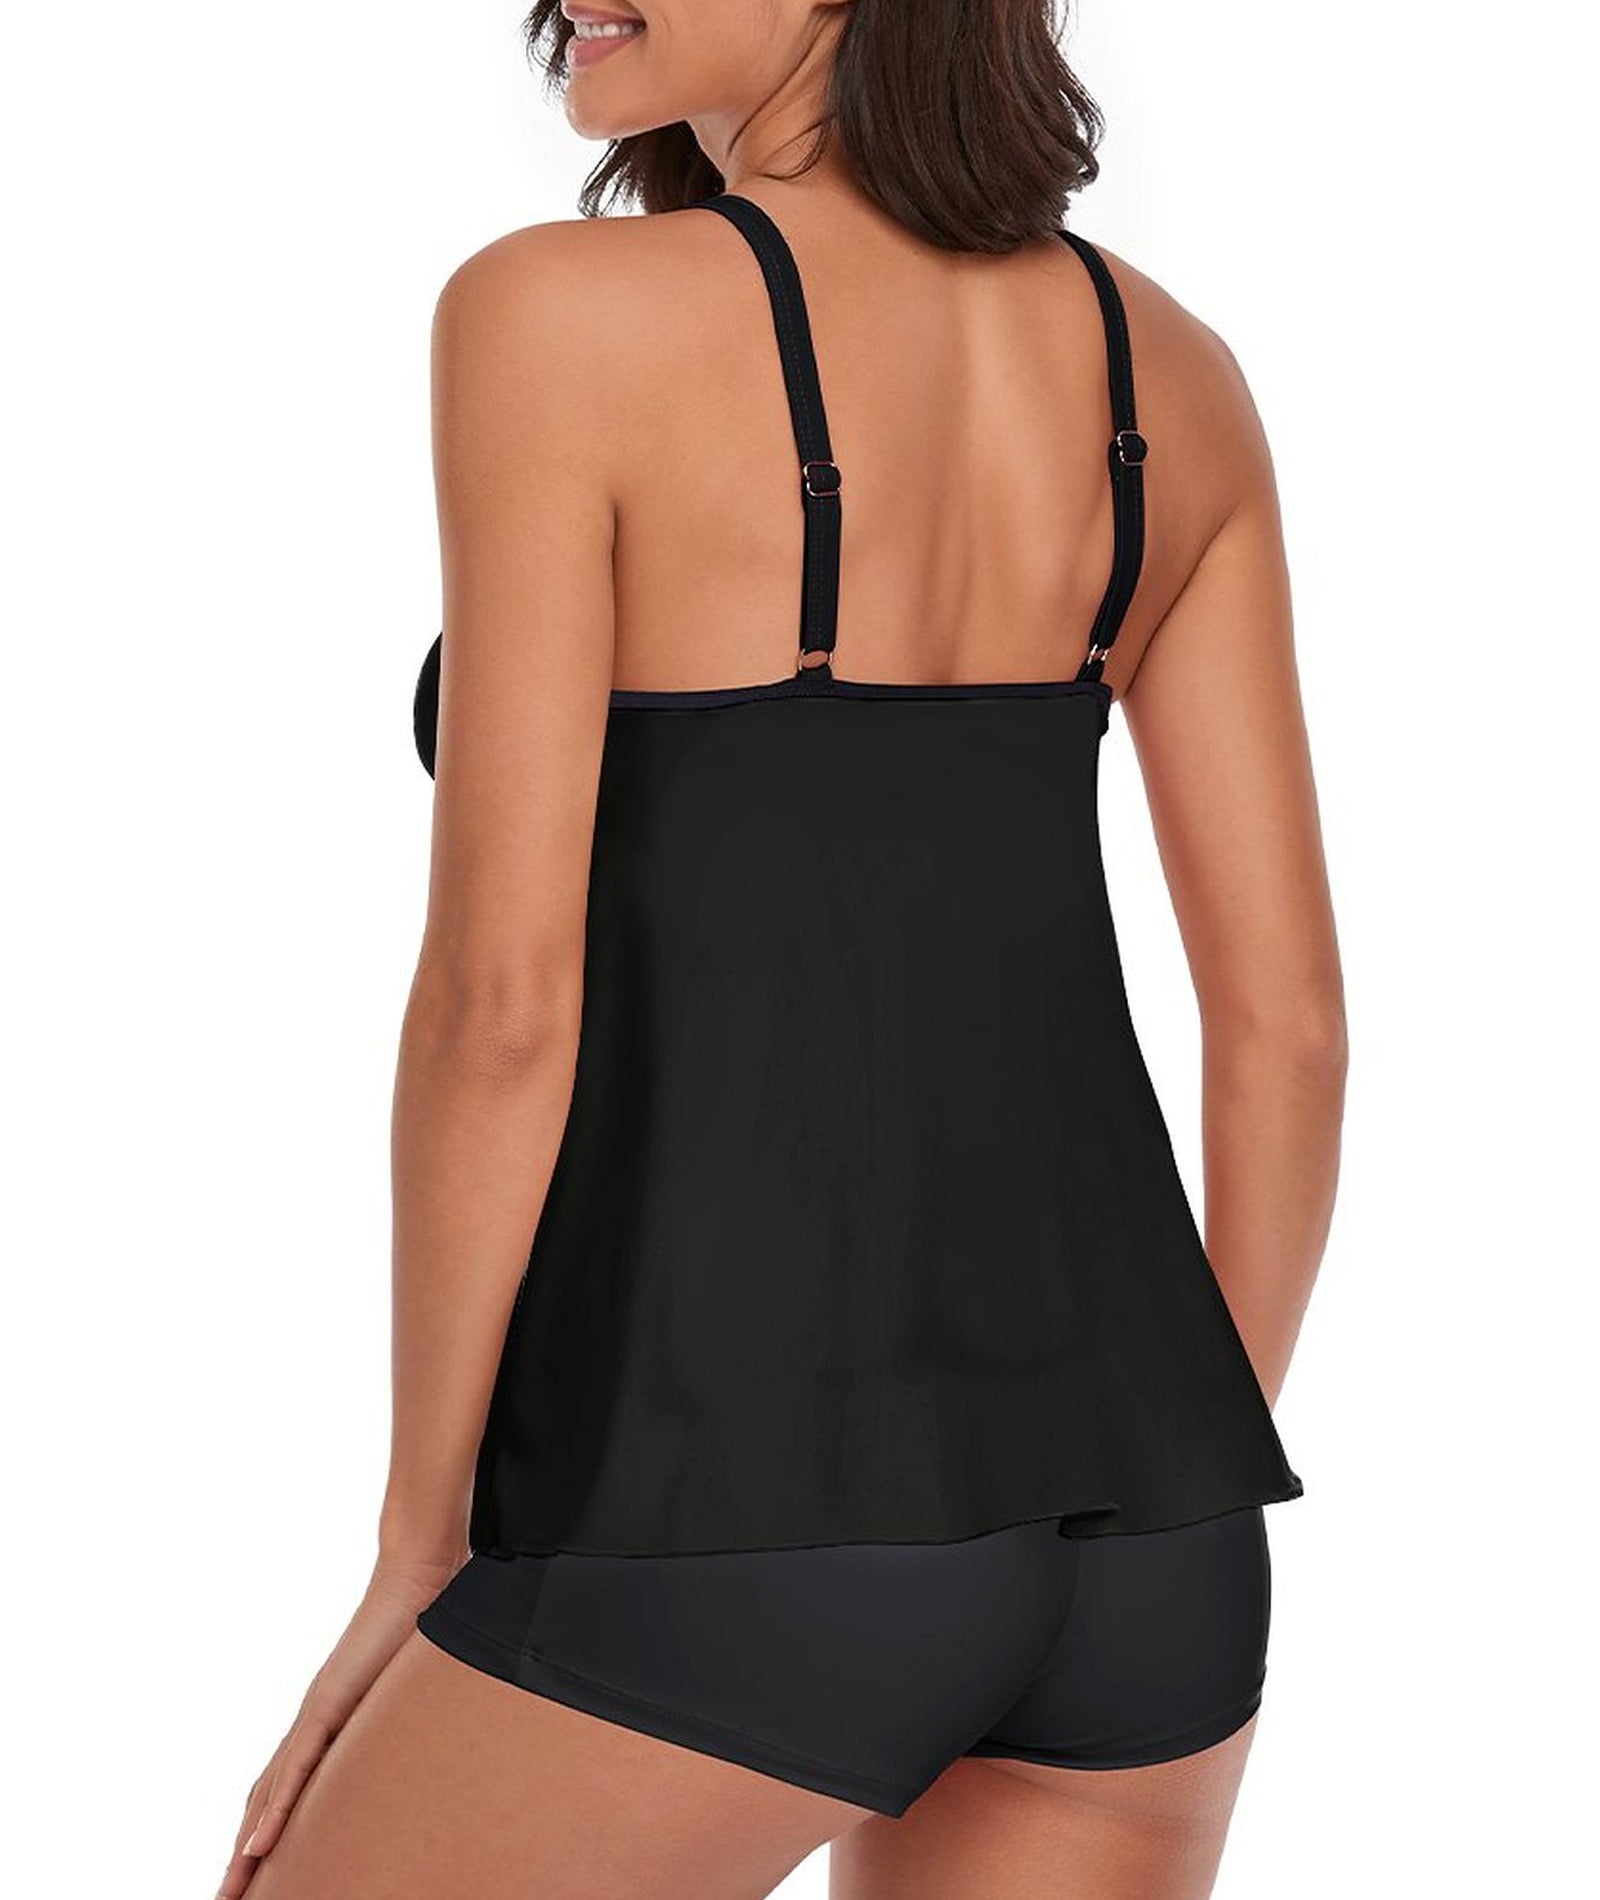 Tankini Black Tank Top Two Piece Bathing Suits with Boyshorts